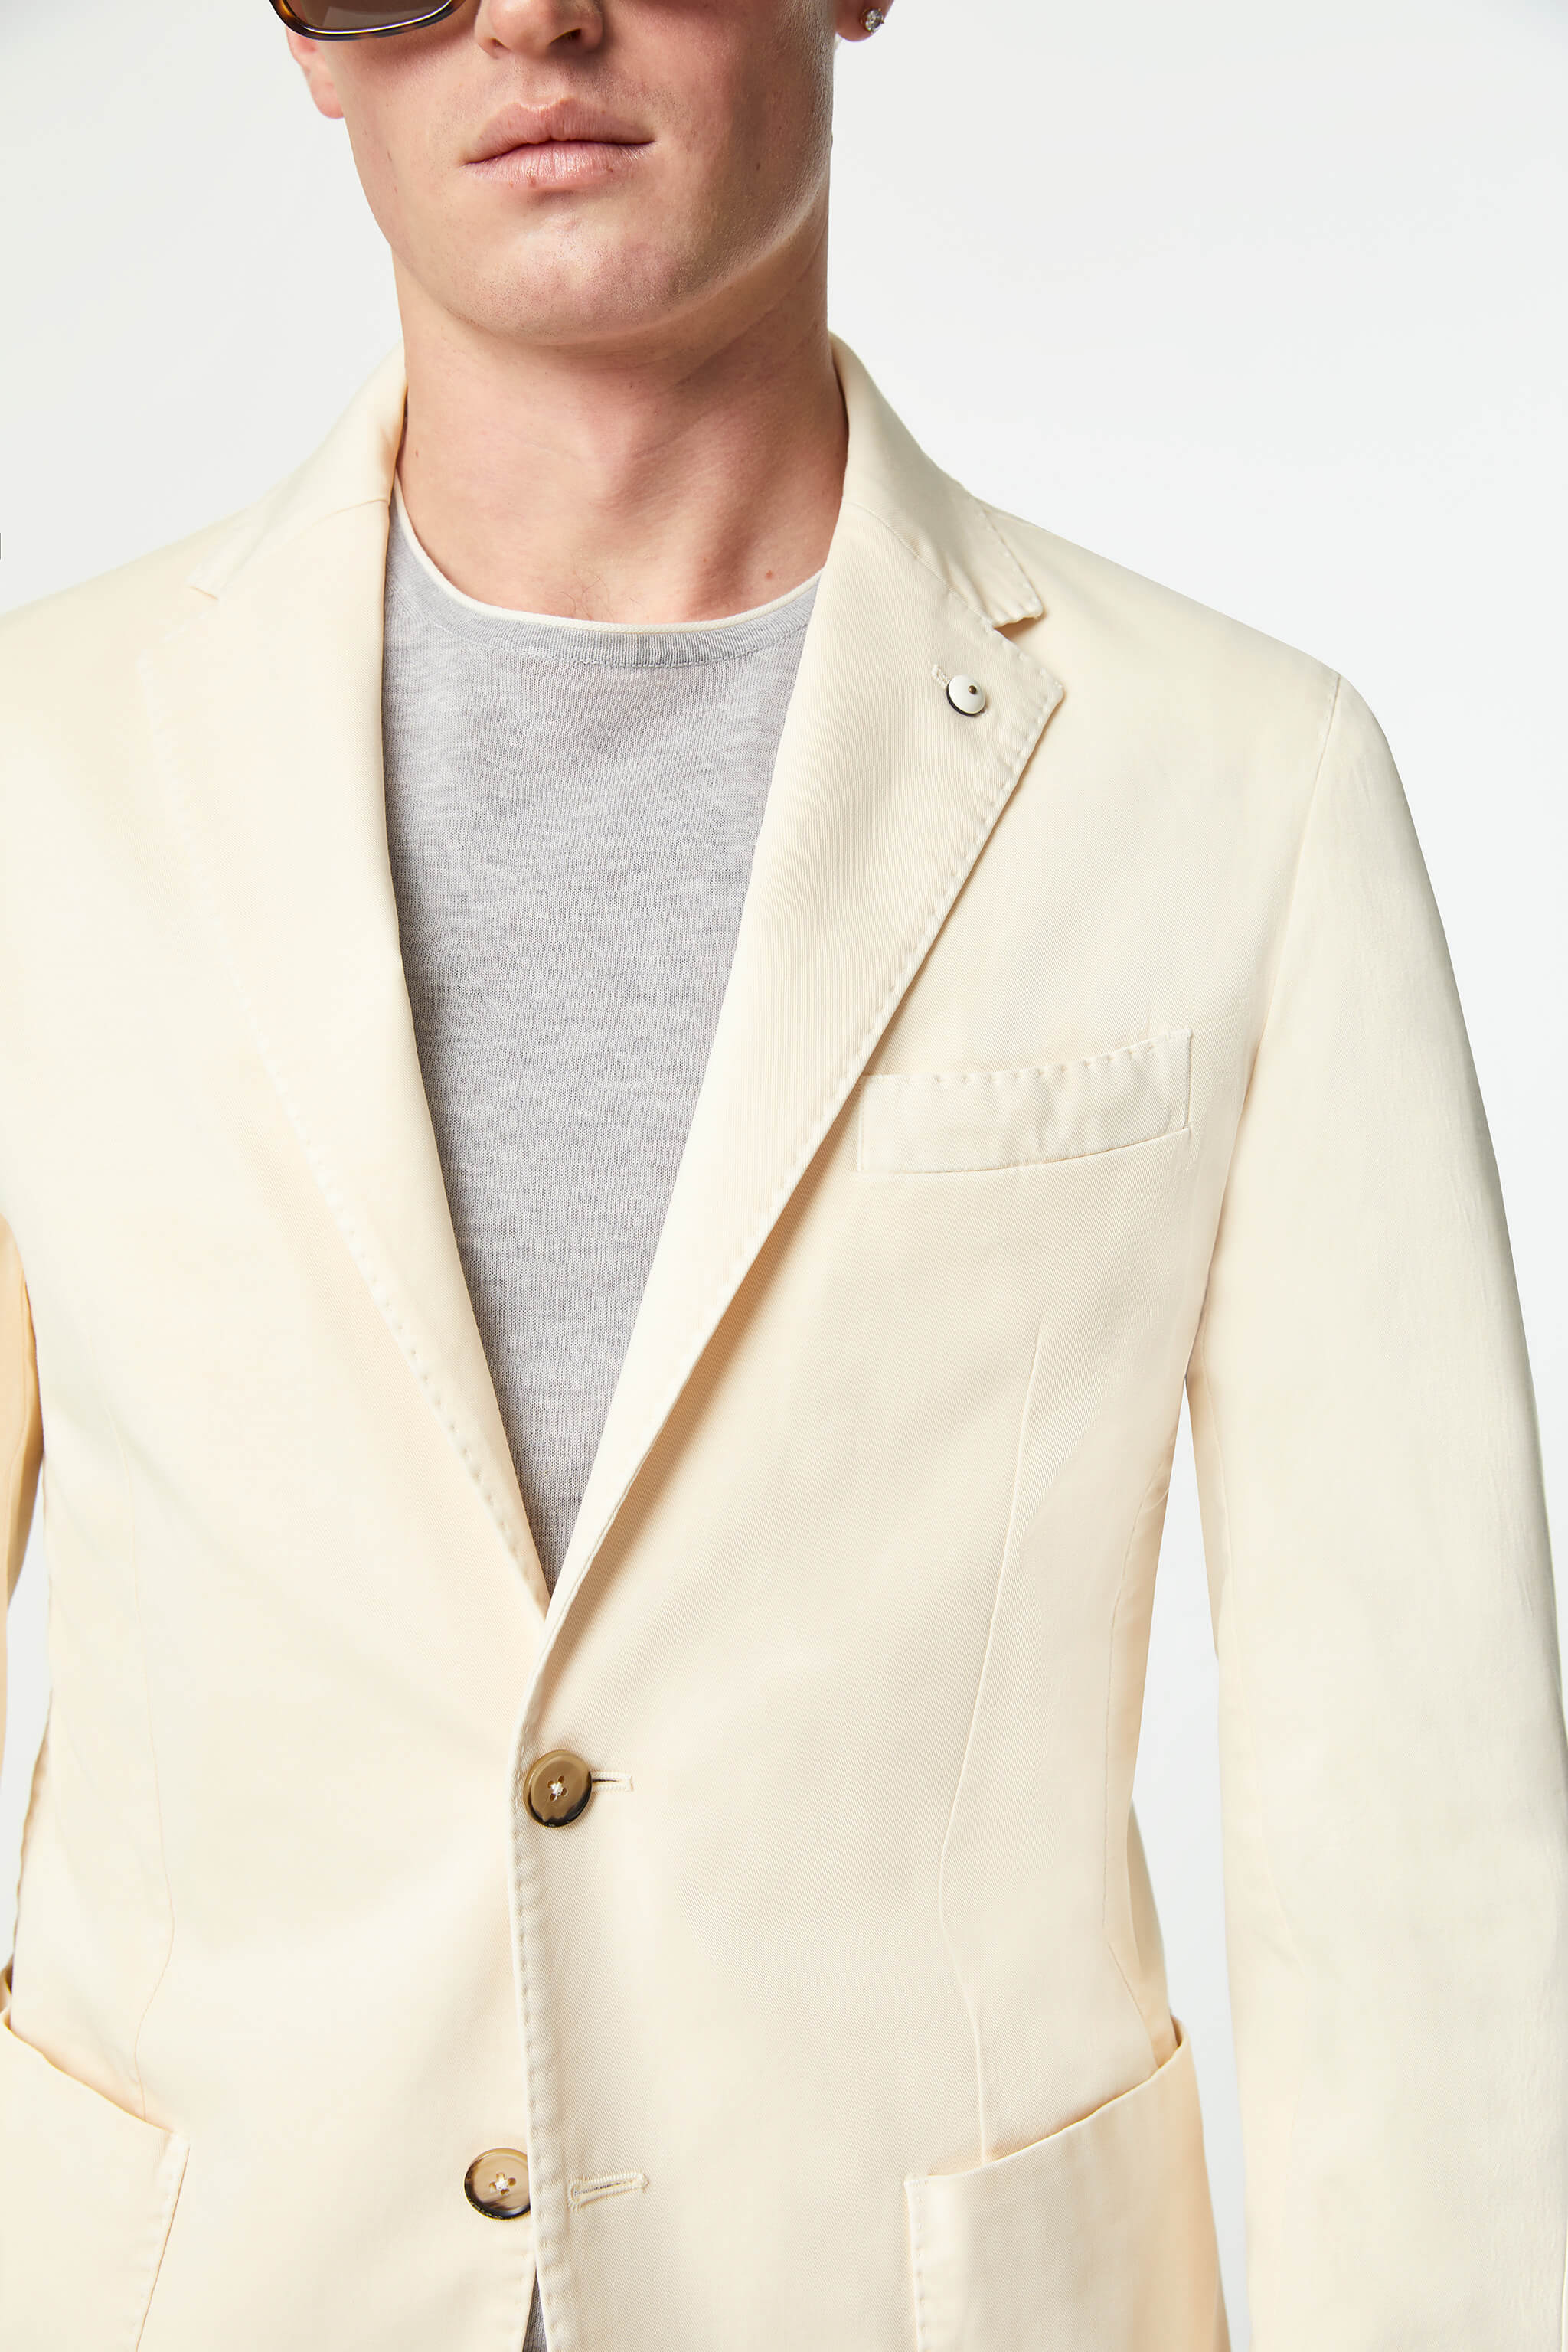 Garment-dyed JACK suit in White